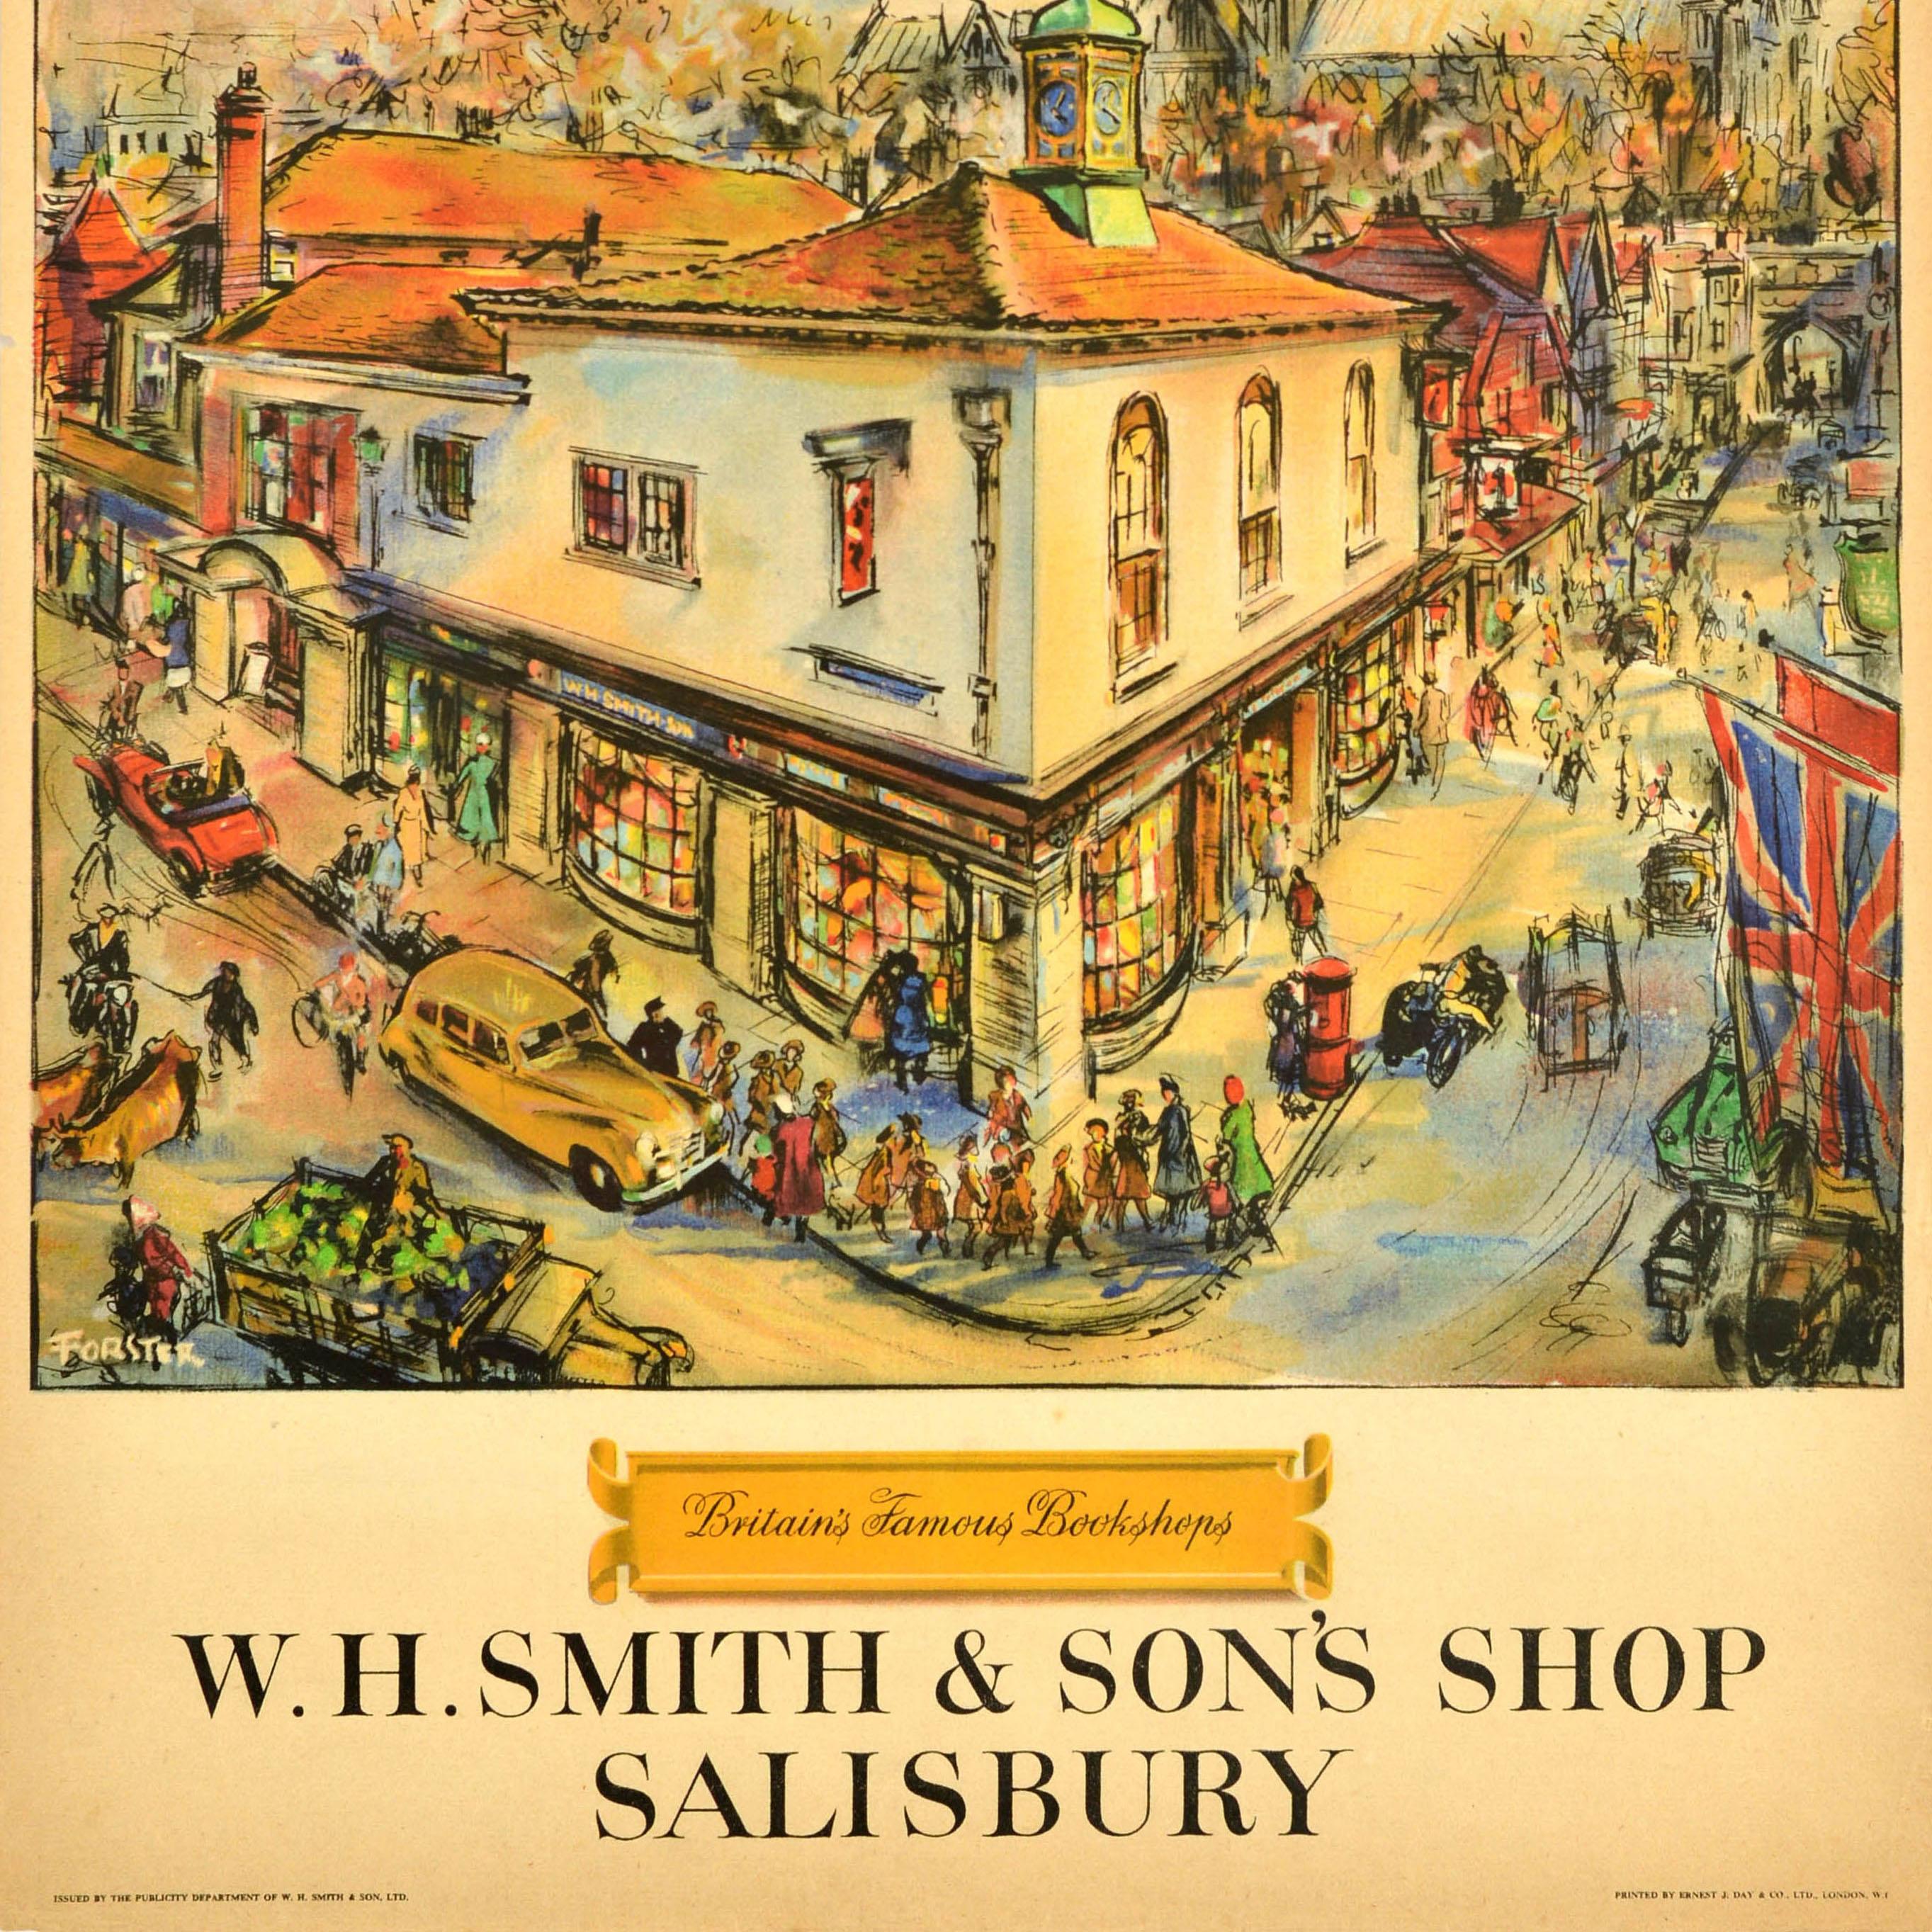 Original vintage advertising poster for Britain's Famous Bookshops WH Smith & Son's Shop Salisbury featuring a busy street scene with cars and trucks on the road, a group of children passing by the store on the corner and people looking into the